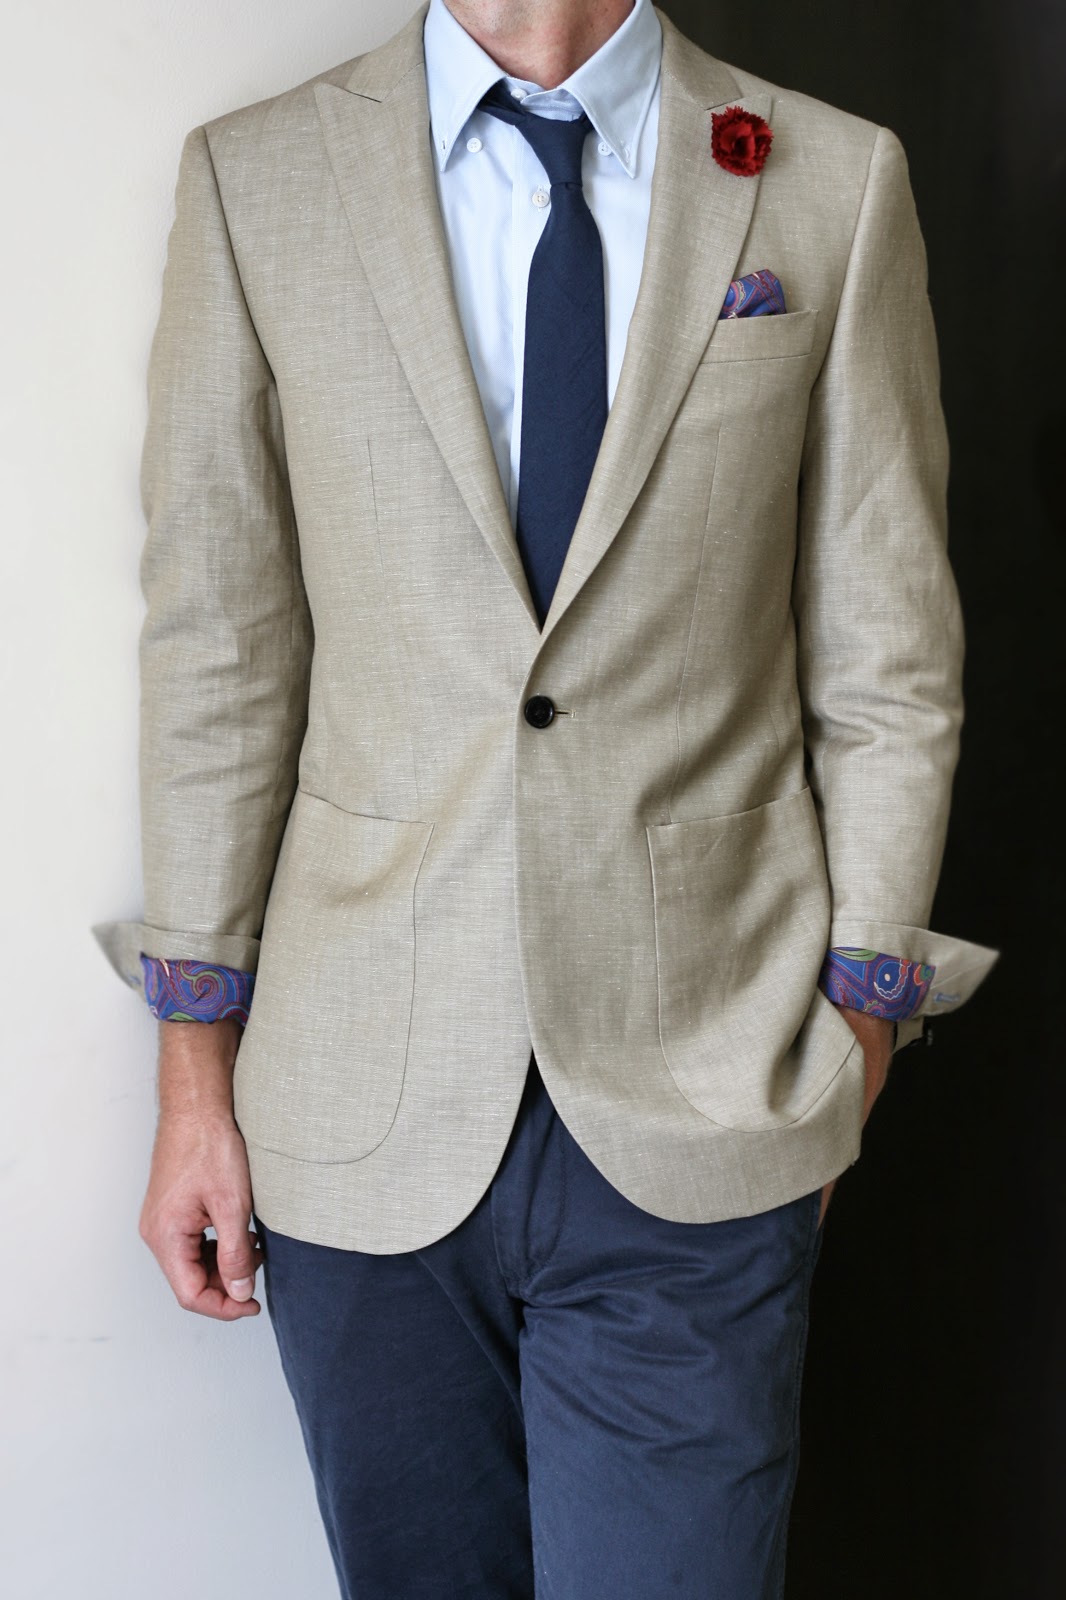 Indochino Suits Review - Must Read This Before Buying